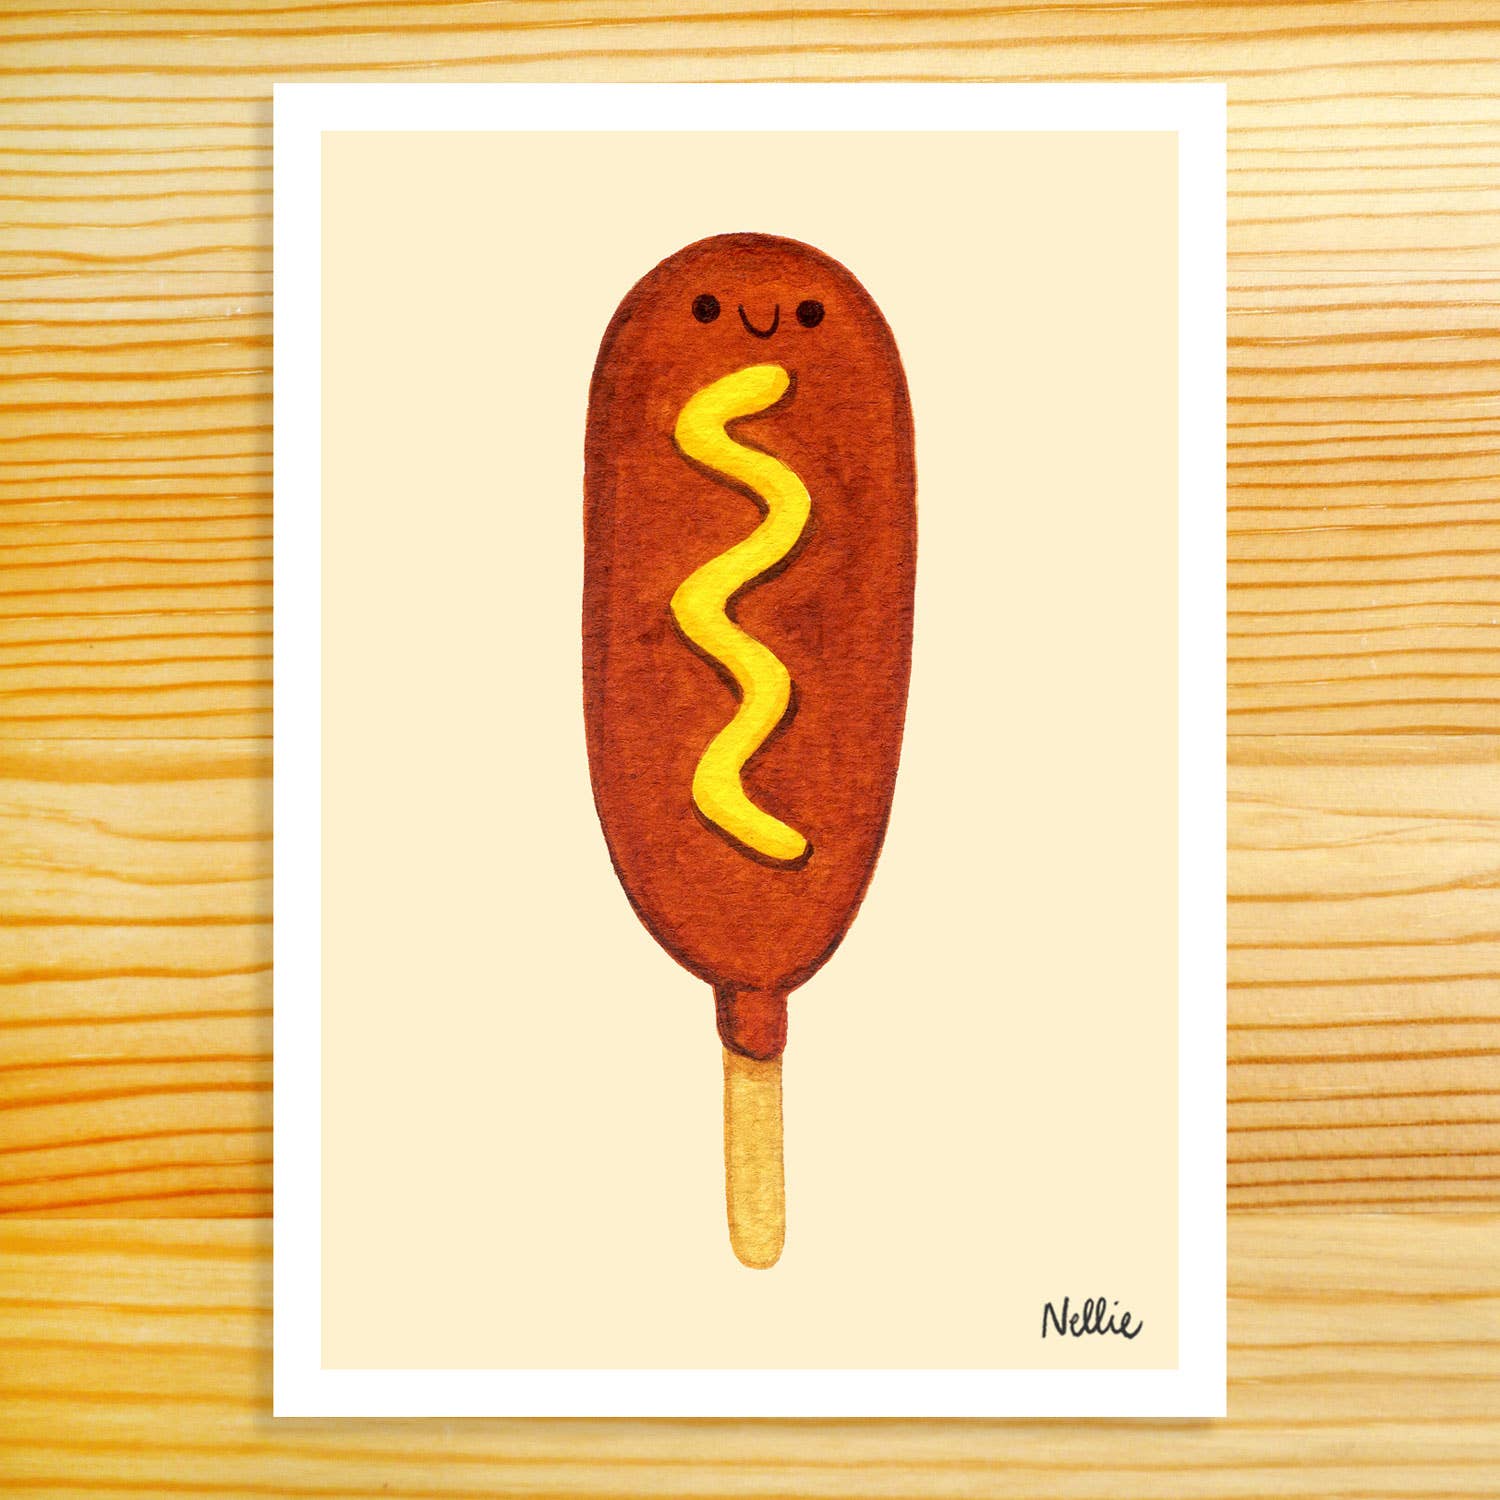 5x7in Art Print of a watercolor painting. Image depicts a corndog with a smiling face and a yellow squiggle of mustard. Background is light tan with a white border. Artist signature "Nellie" in the bottom right corner.